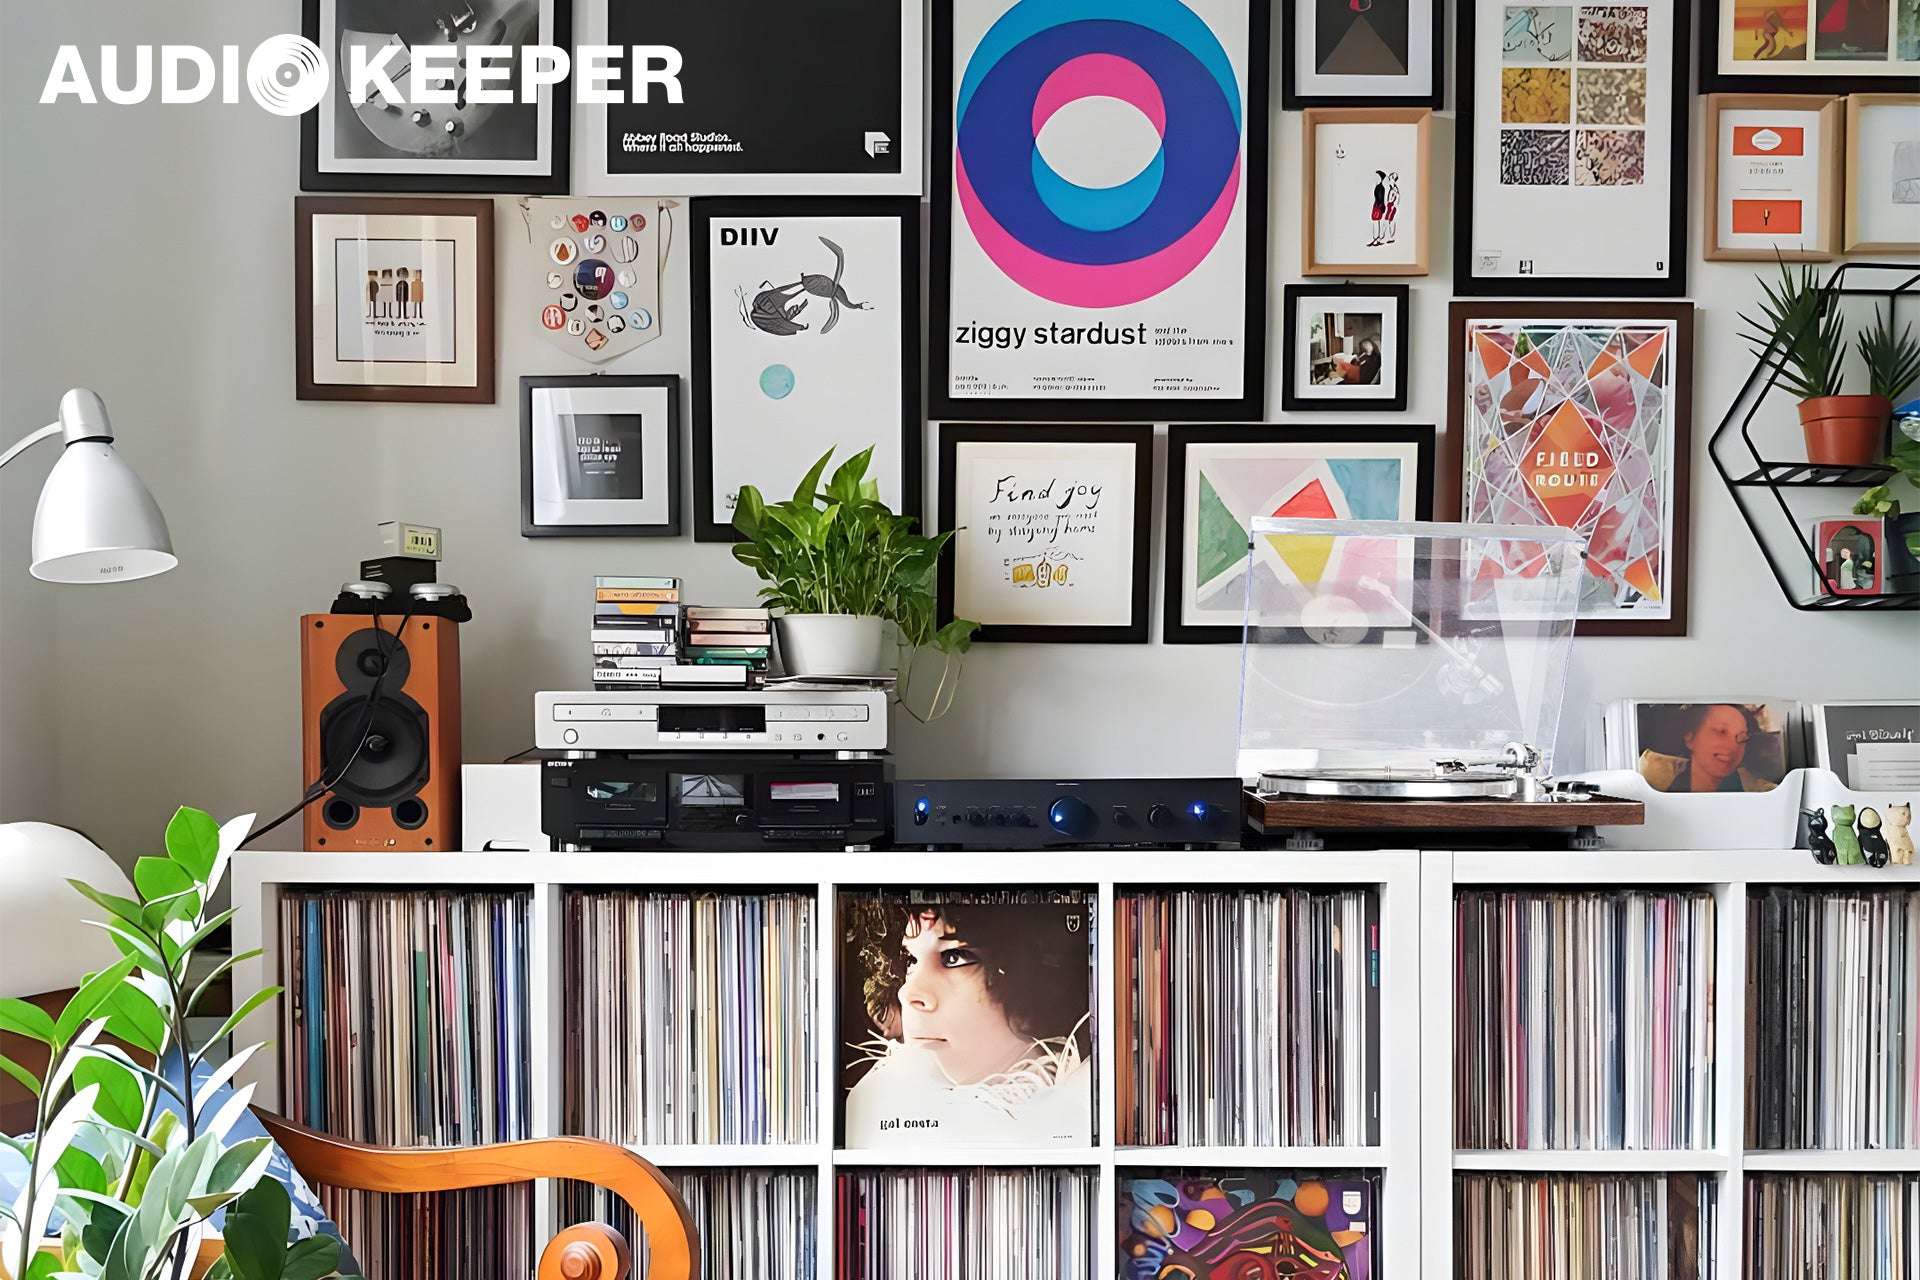 Mother’s Day Limited Offer: The Perfect Opportunity to Create a Home Music Room